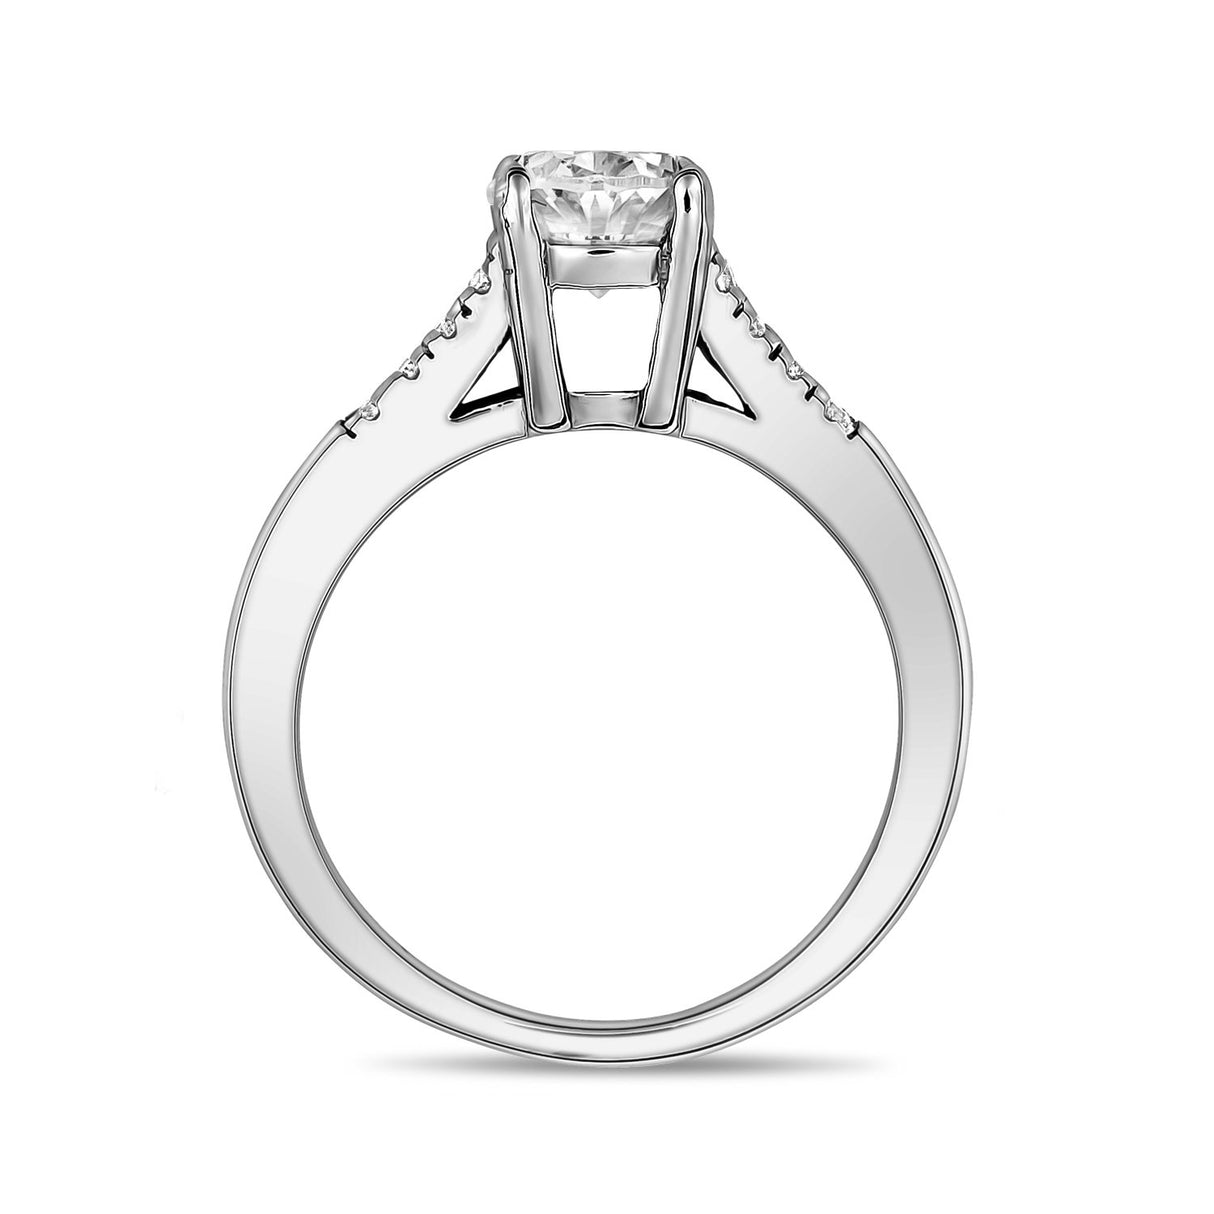 Vrouwen Ring - Roestvrij staal Ronde Solitaire Ring